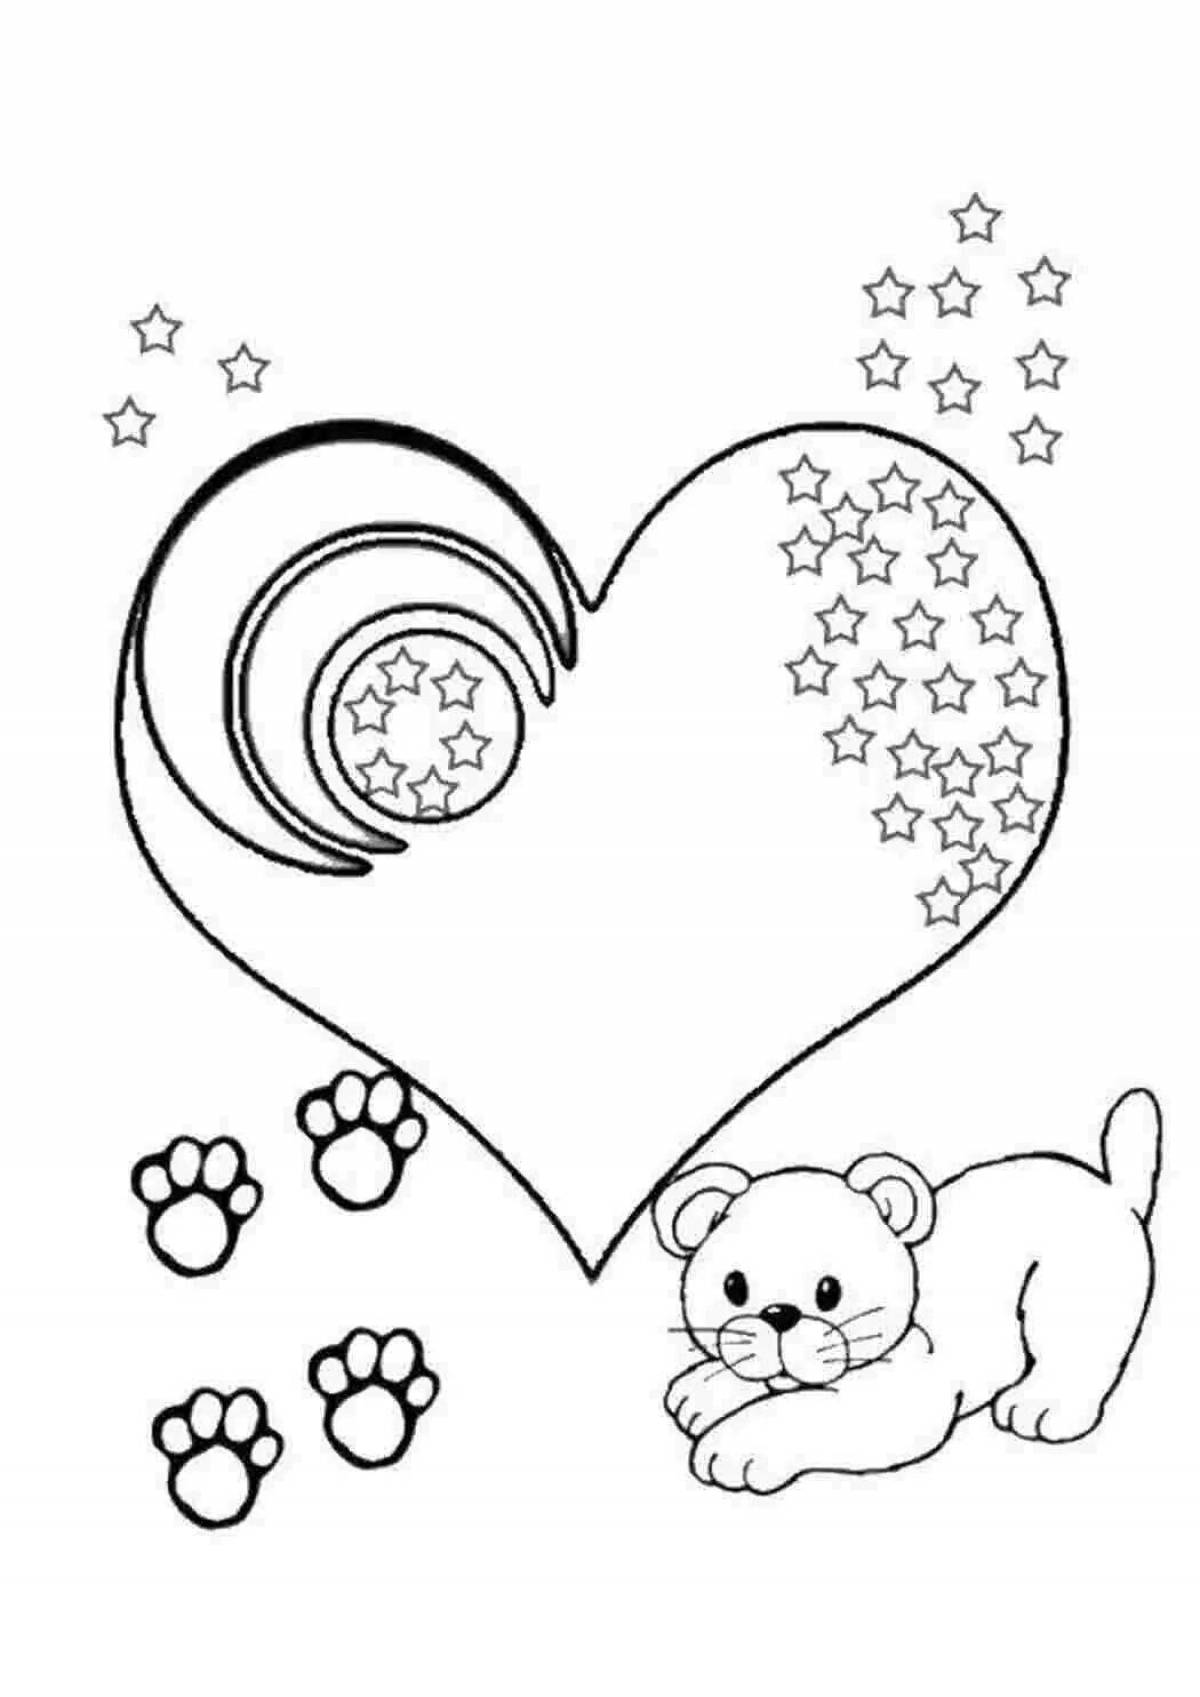 Colorful heart and star coloring book